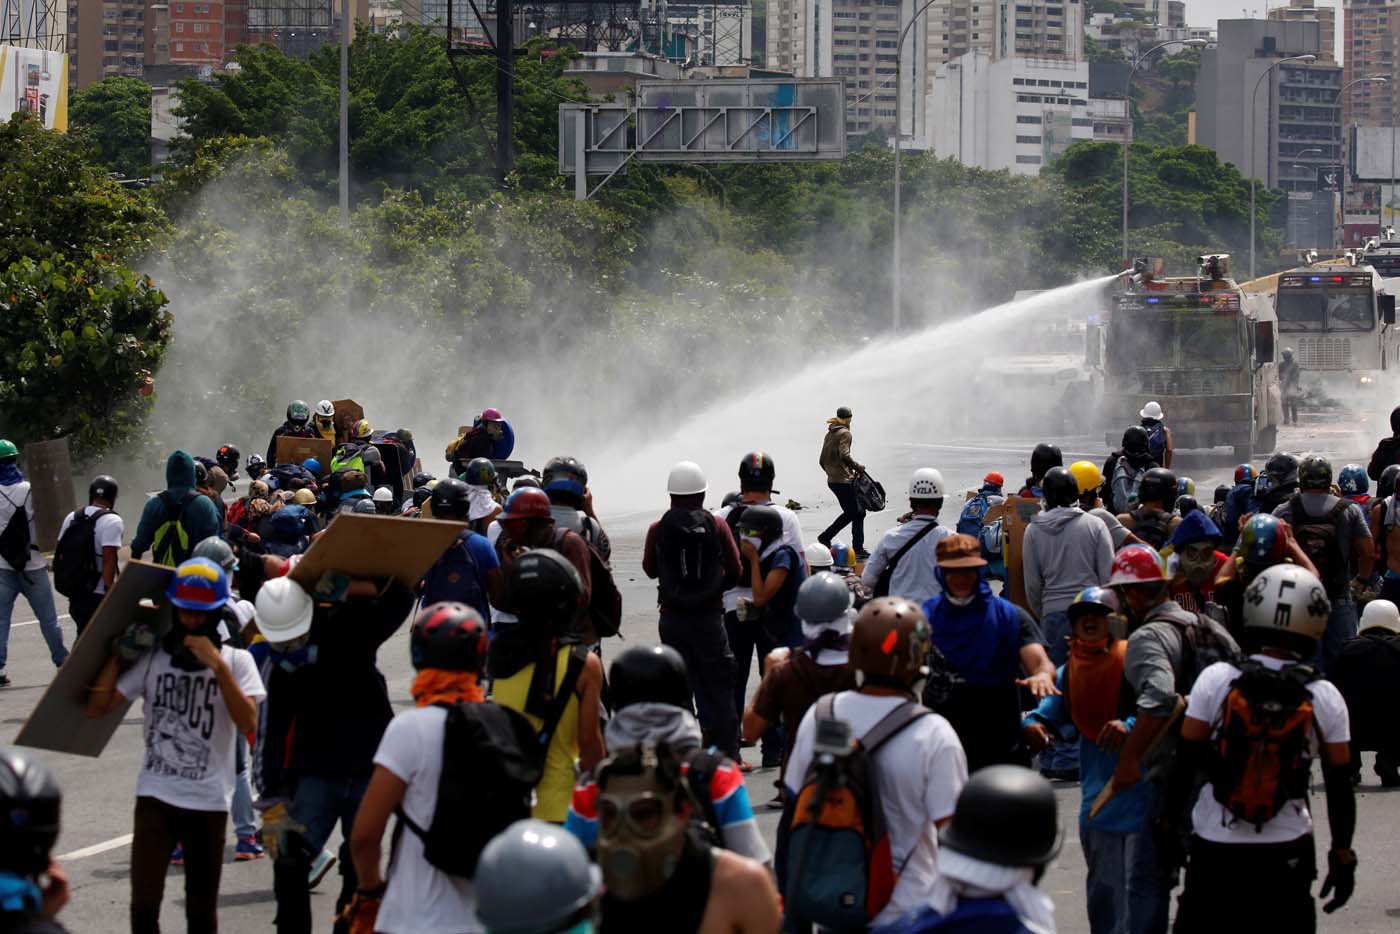 Riot security forces use a water canon while clashing with demonstrators rallying against President Nicolas Maduro in Caracas, Venezuela, May 24, 2017. REUTERS/Carlos Garcia Rawlins